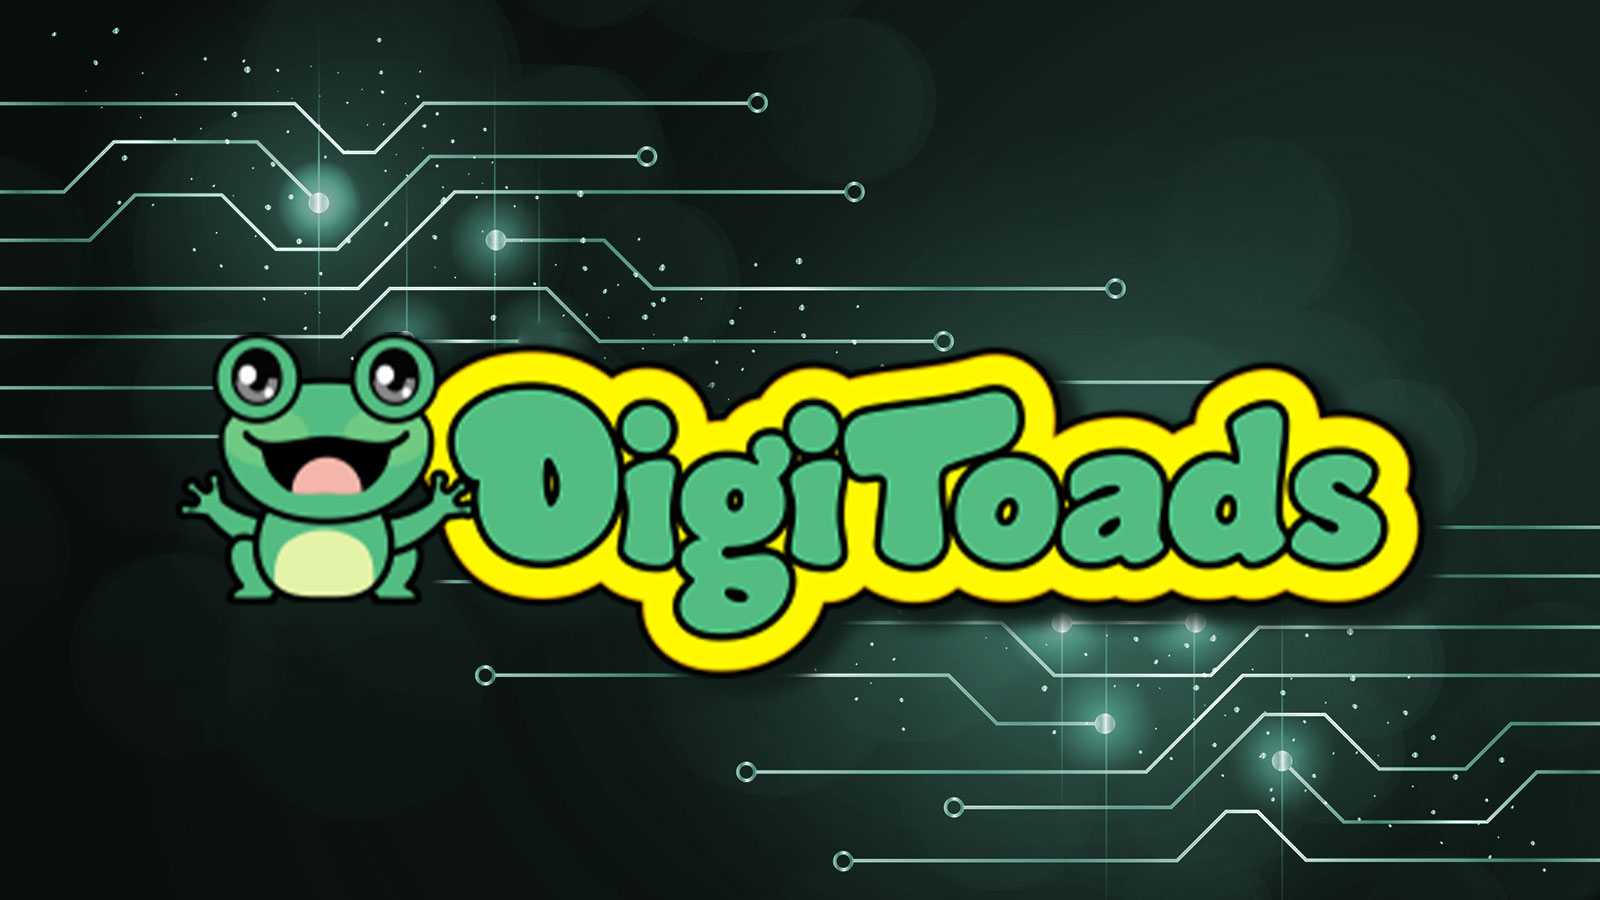 DigiToads (TOADS) Play-to-Earn Innovators Secured Over $225,000 In On-Going Pre-Sale